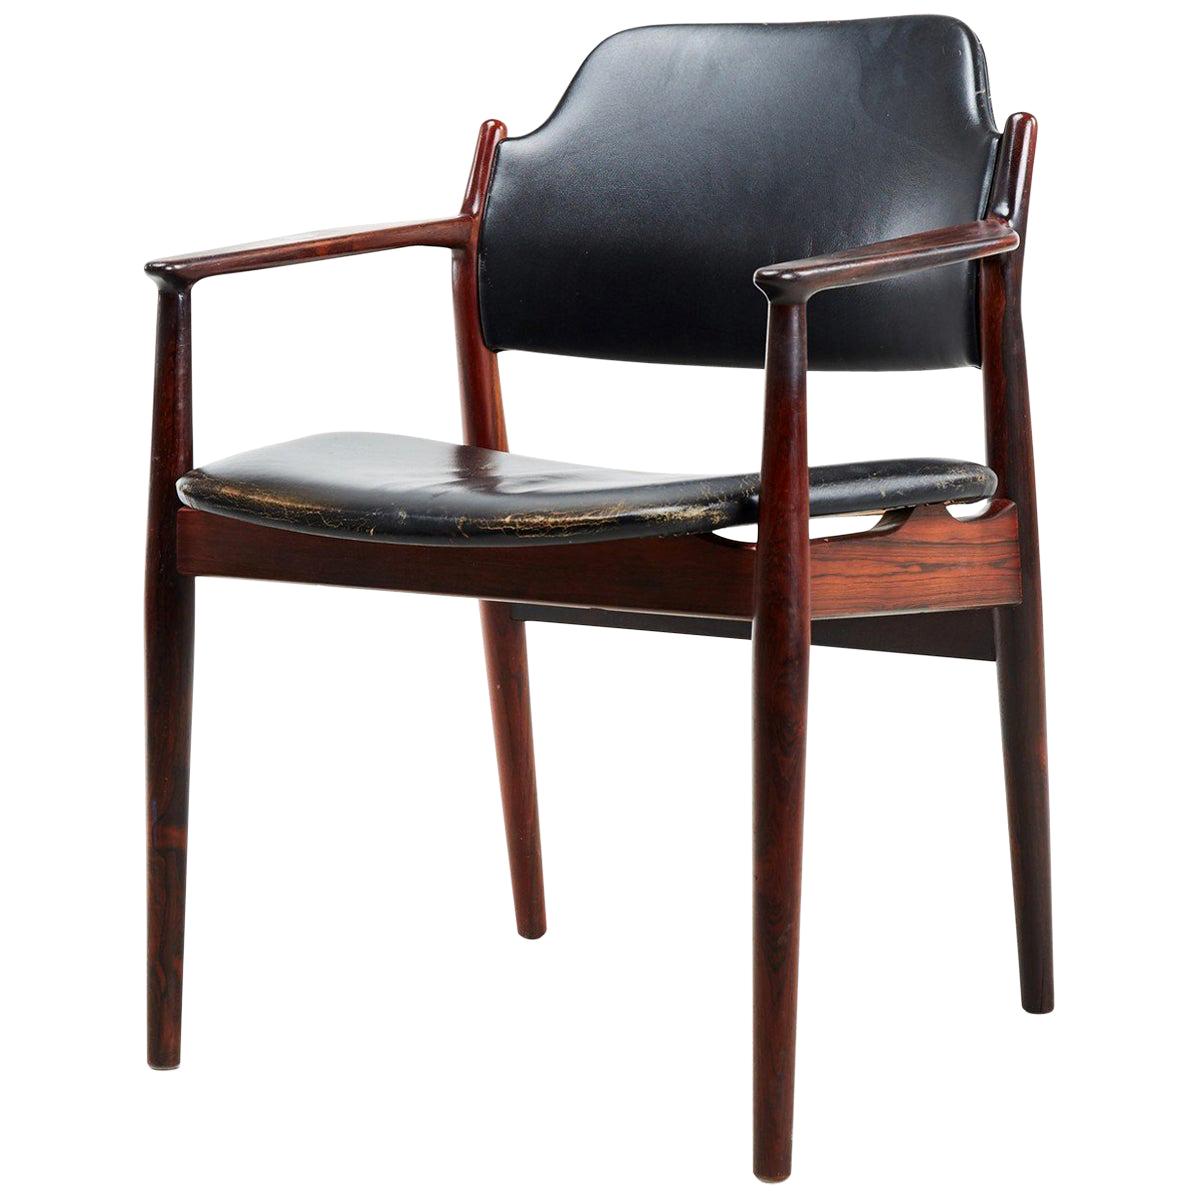 1960s Arne Vodder Rosewood Armchairs by Sibast Møbler Inc Re-Upholstery